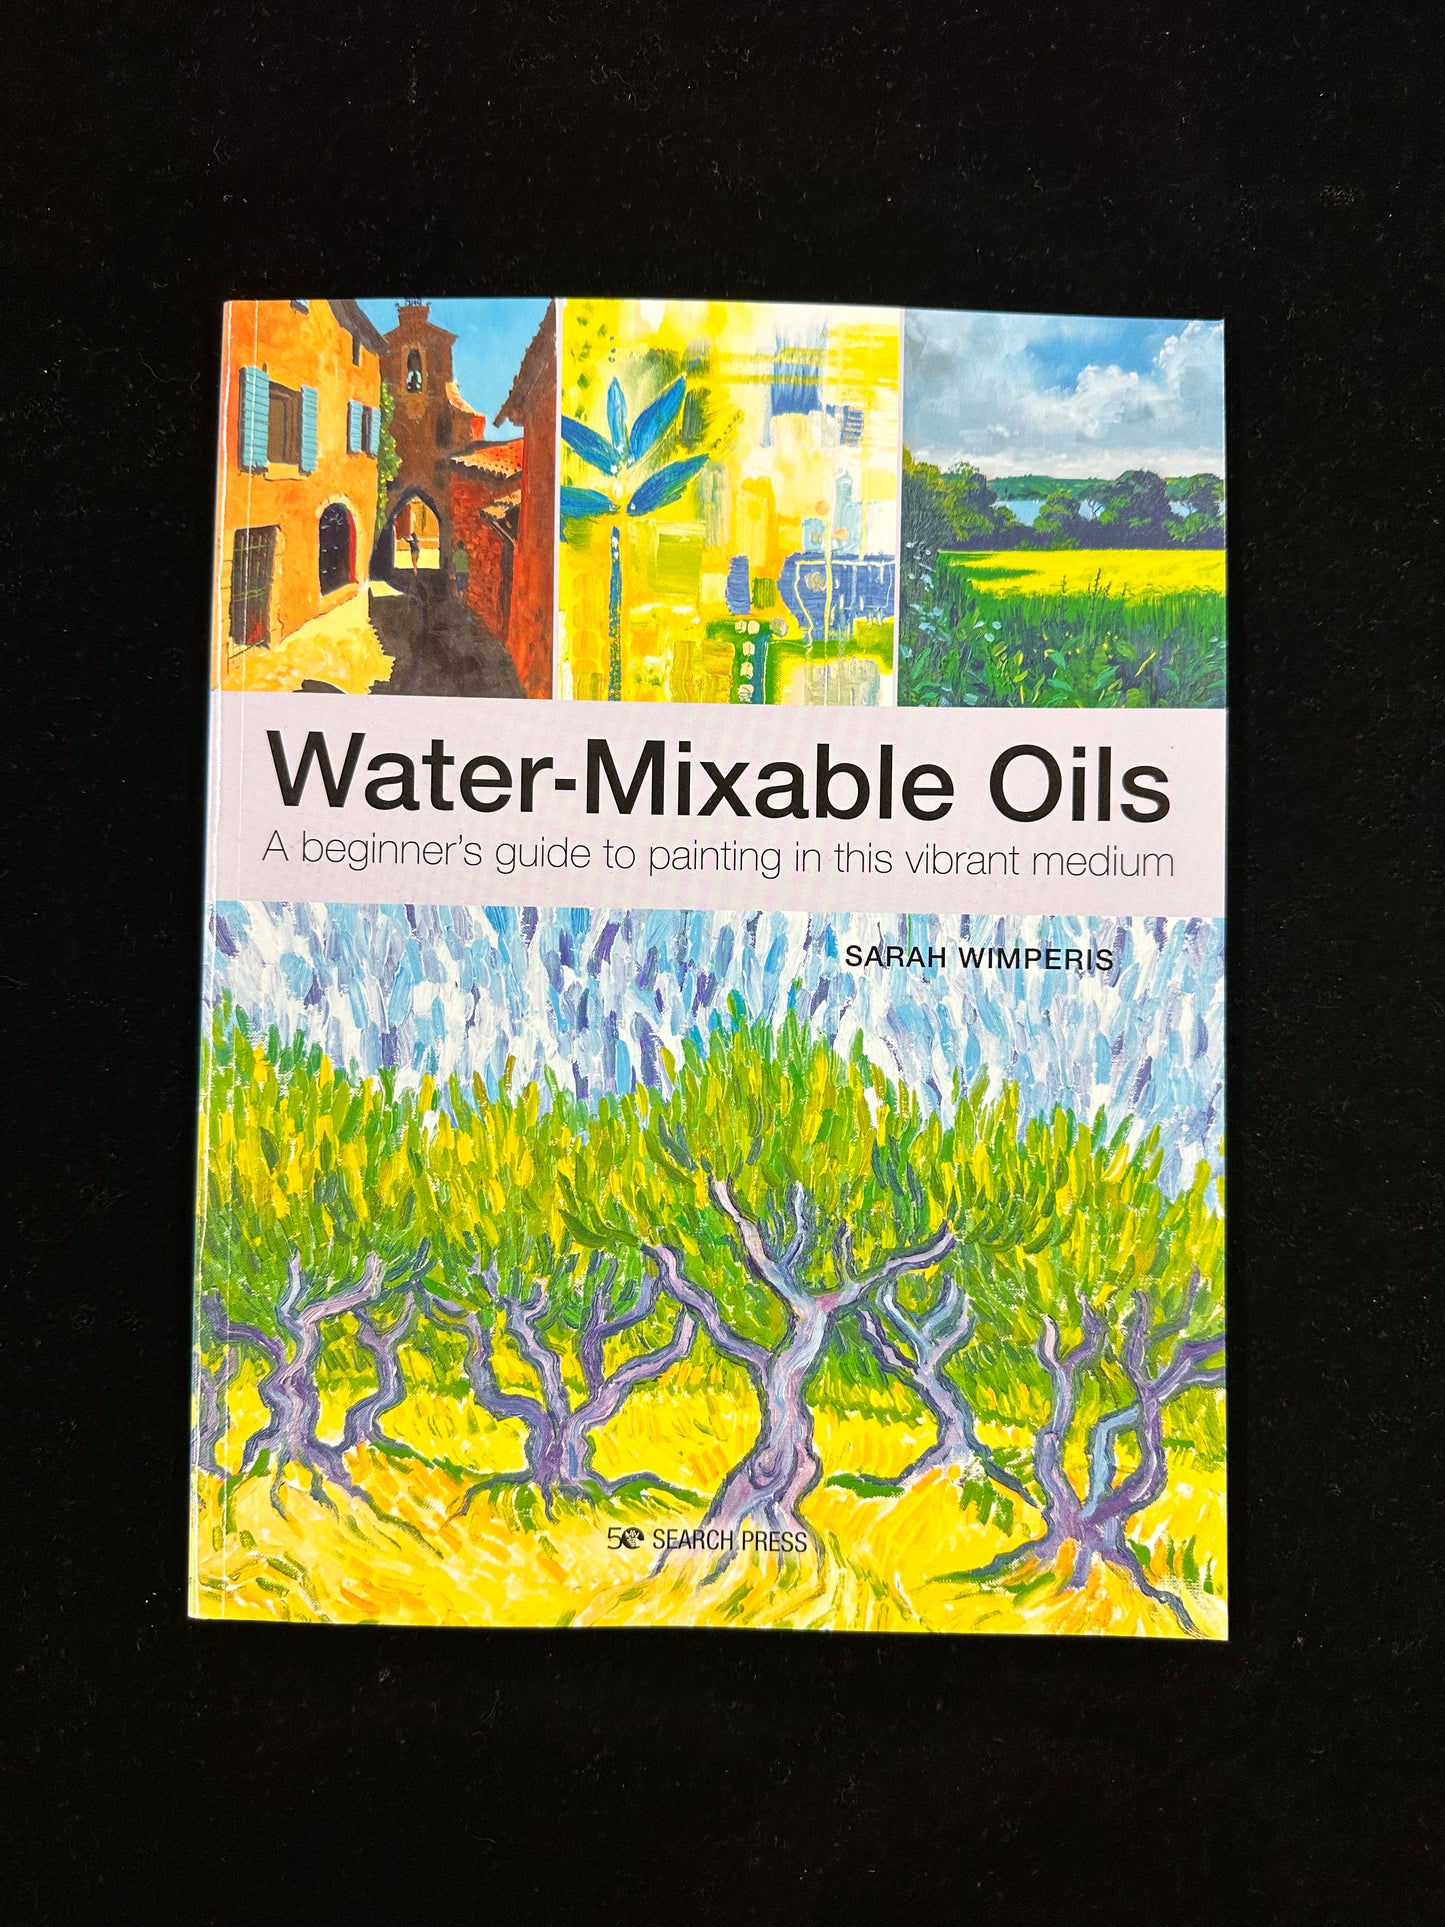 Water-Mixable Oils - A beginners guide to painting in this vibrant medium